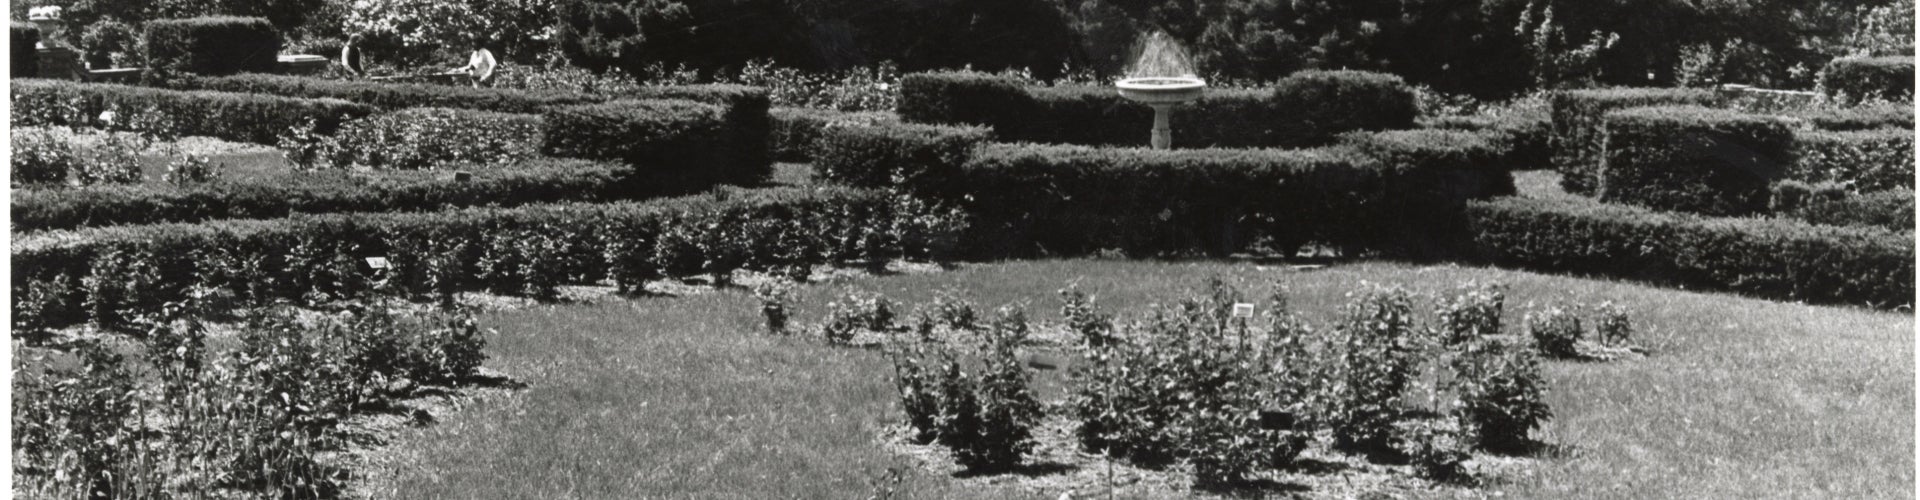 A black and white photograph of a public garden in 1971.